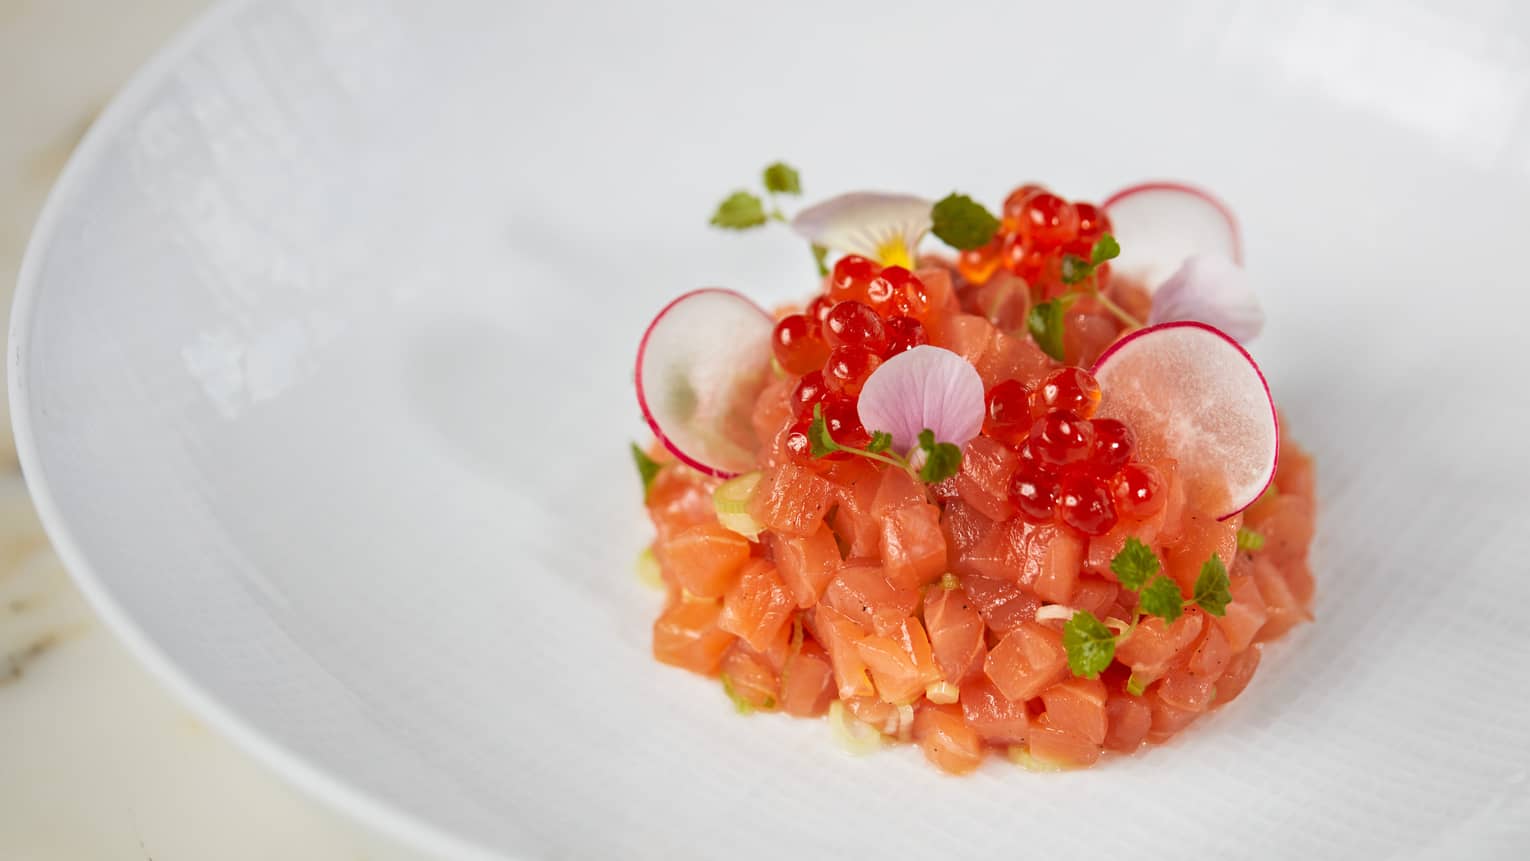 Raw salmon cut into small pieces with fish roe and herbs.